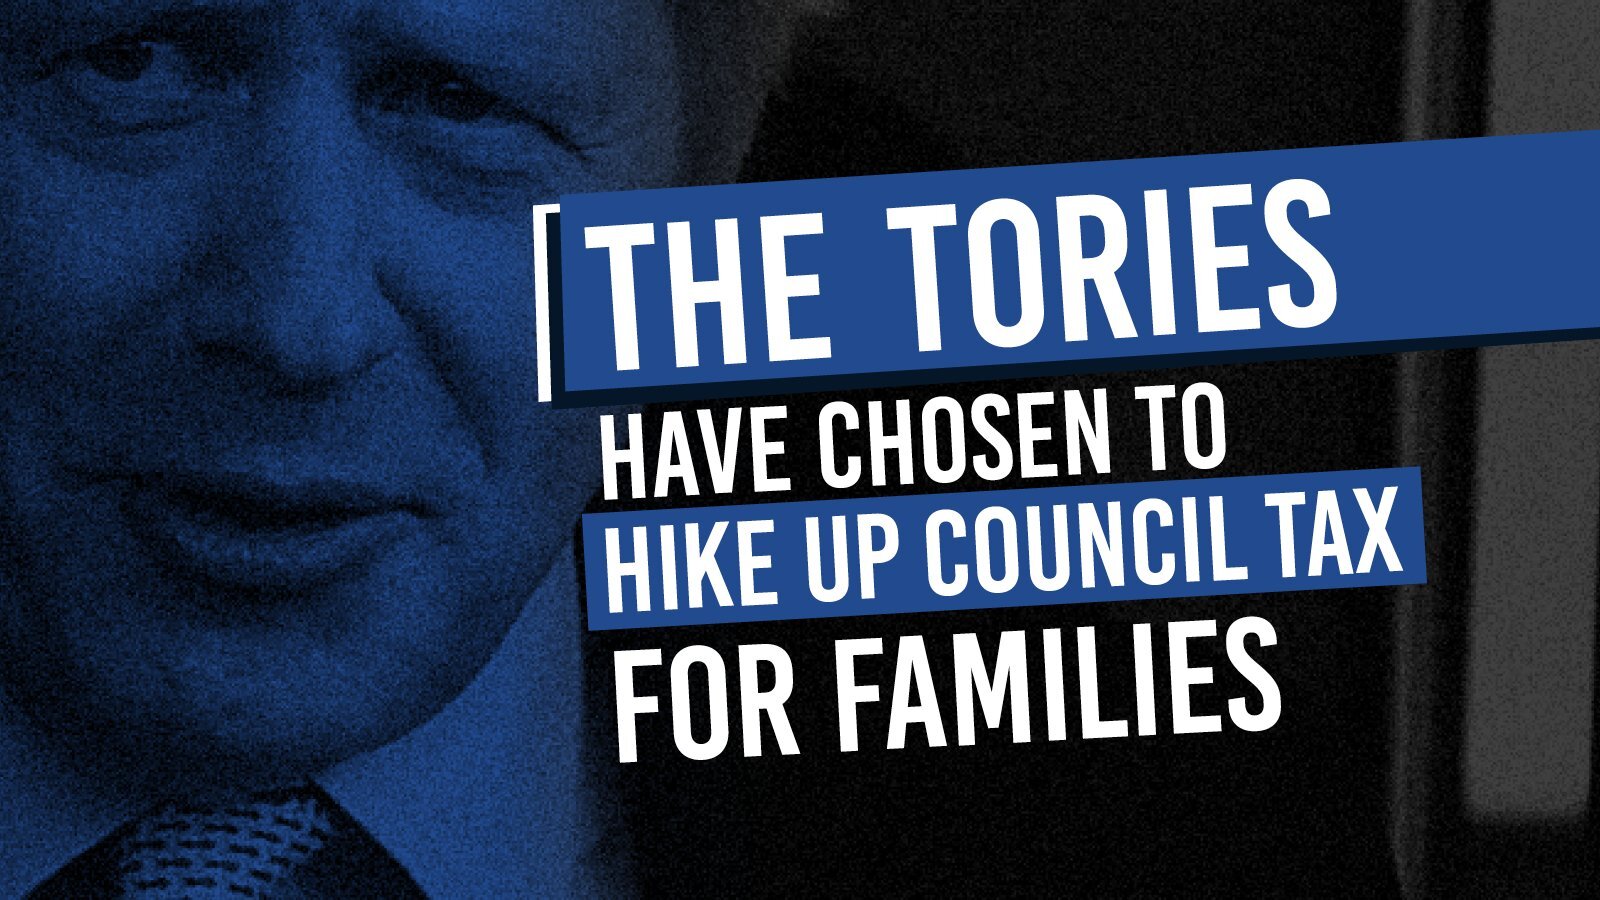 Labour is calling for the Government to scrap this planned council tax rise.